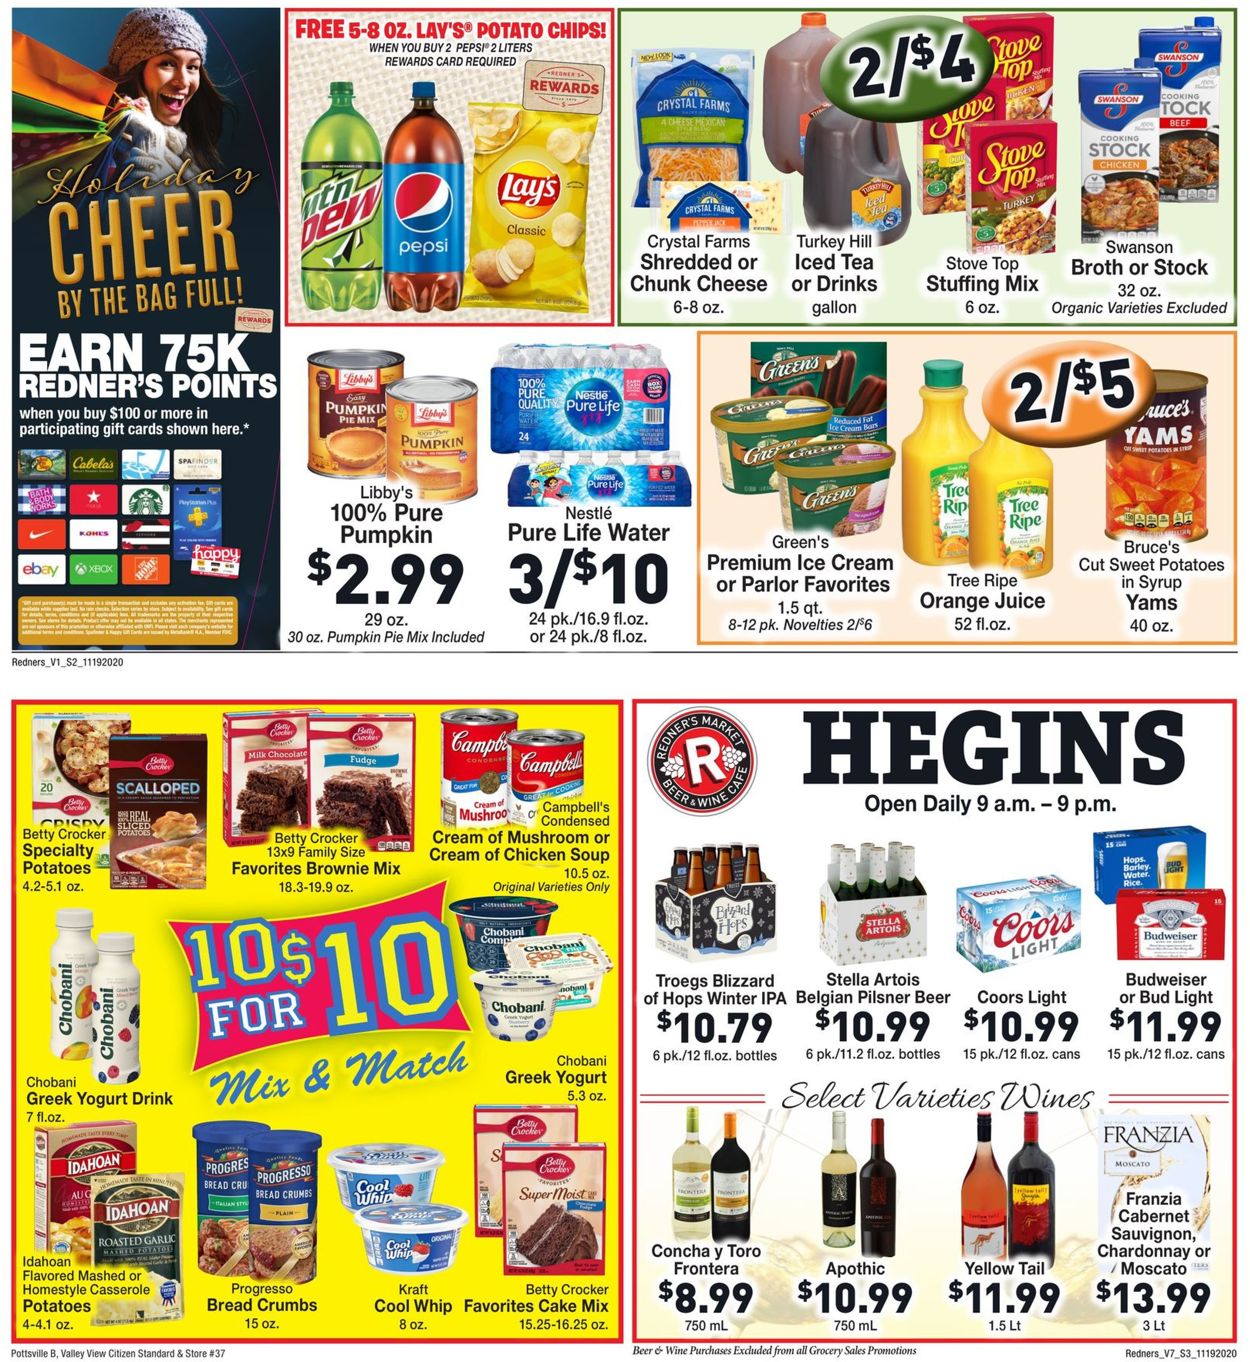 Catalogue Redner’s Warehouse Market from 11/19/2020